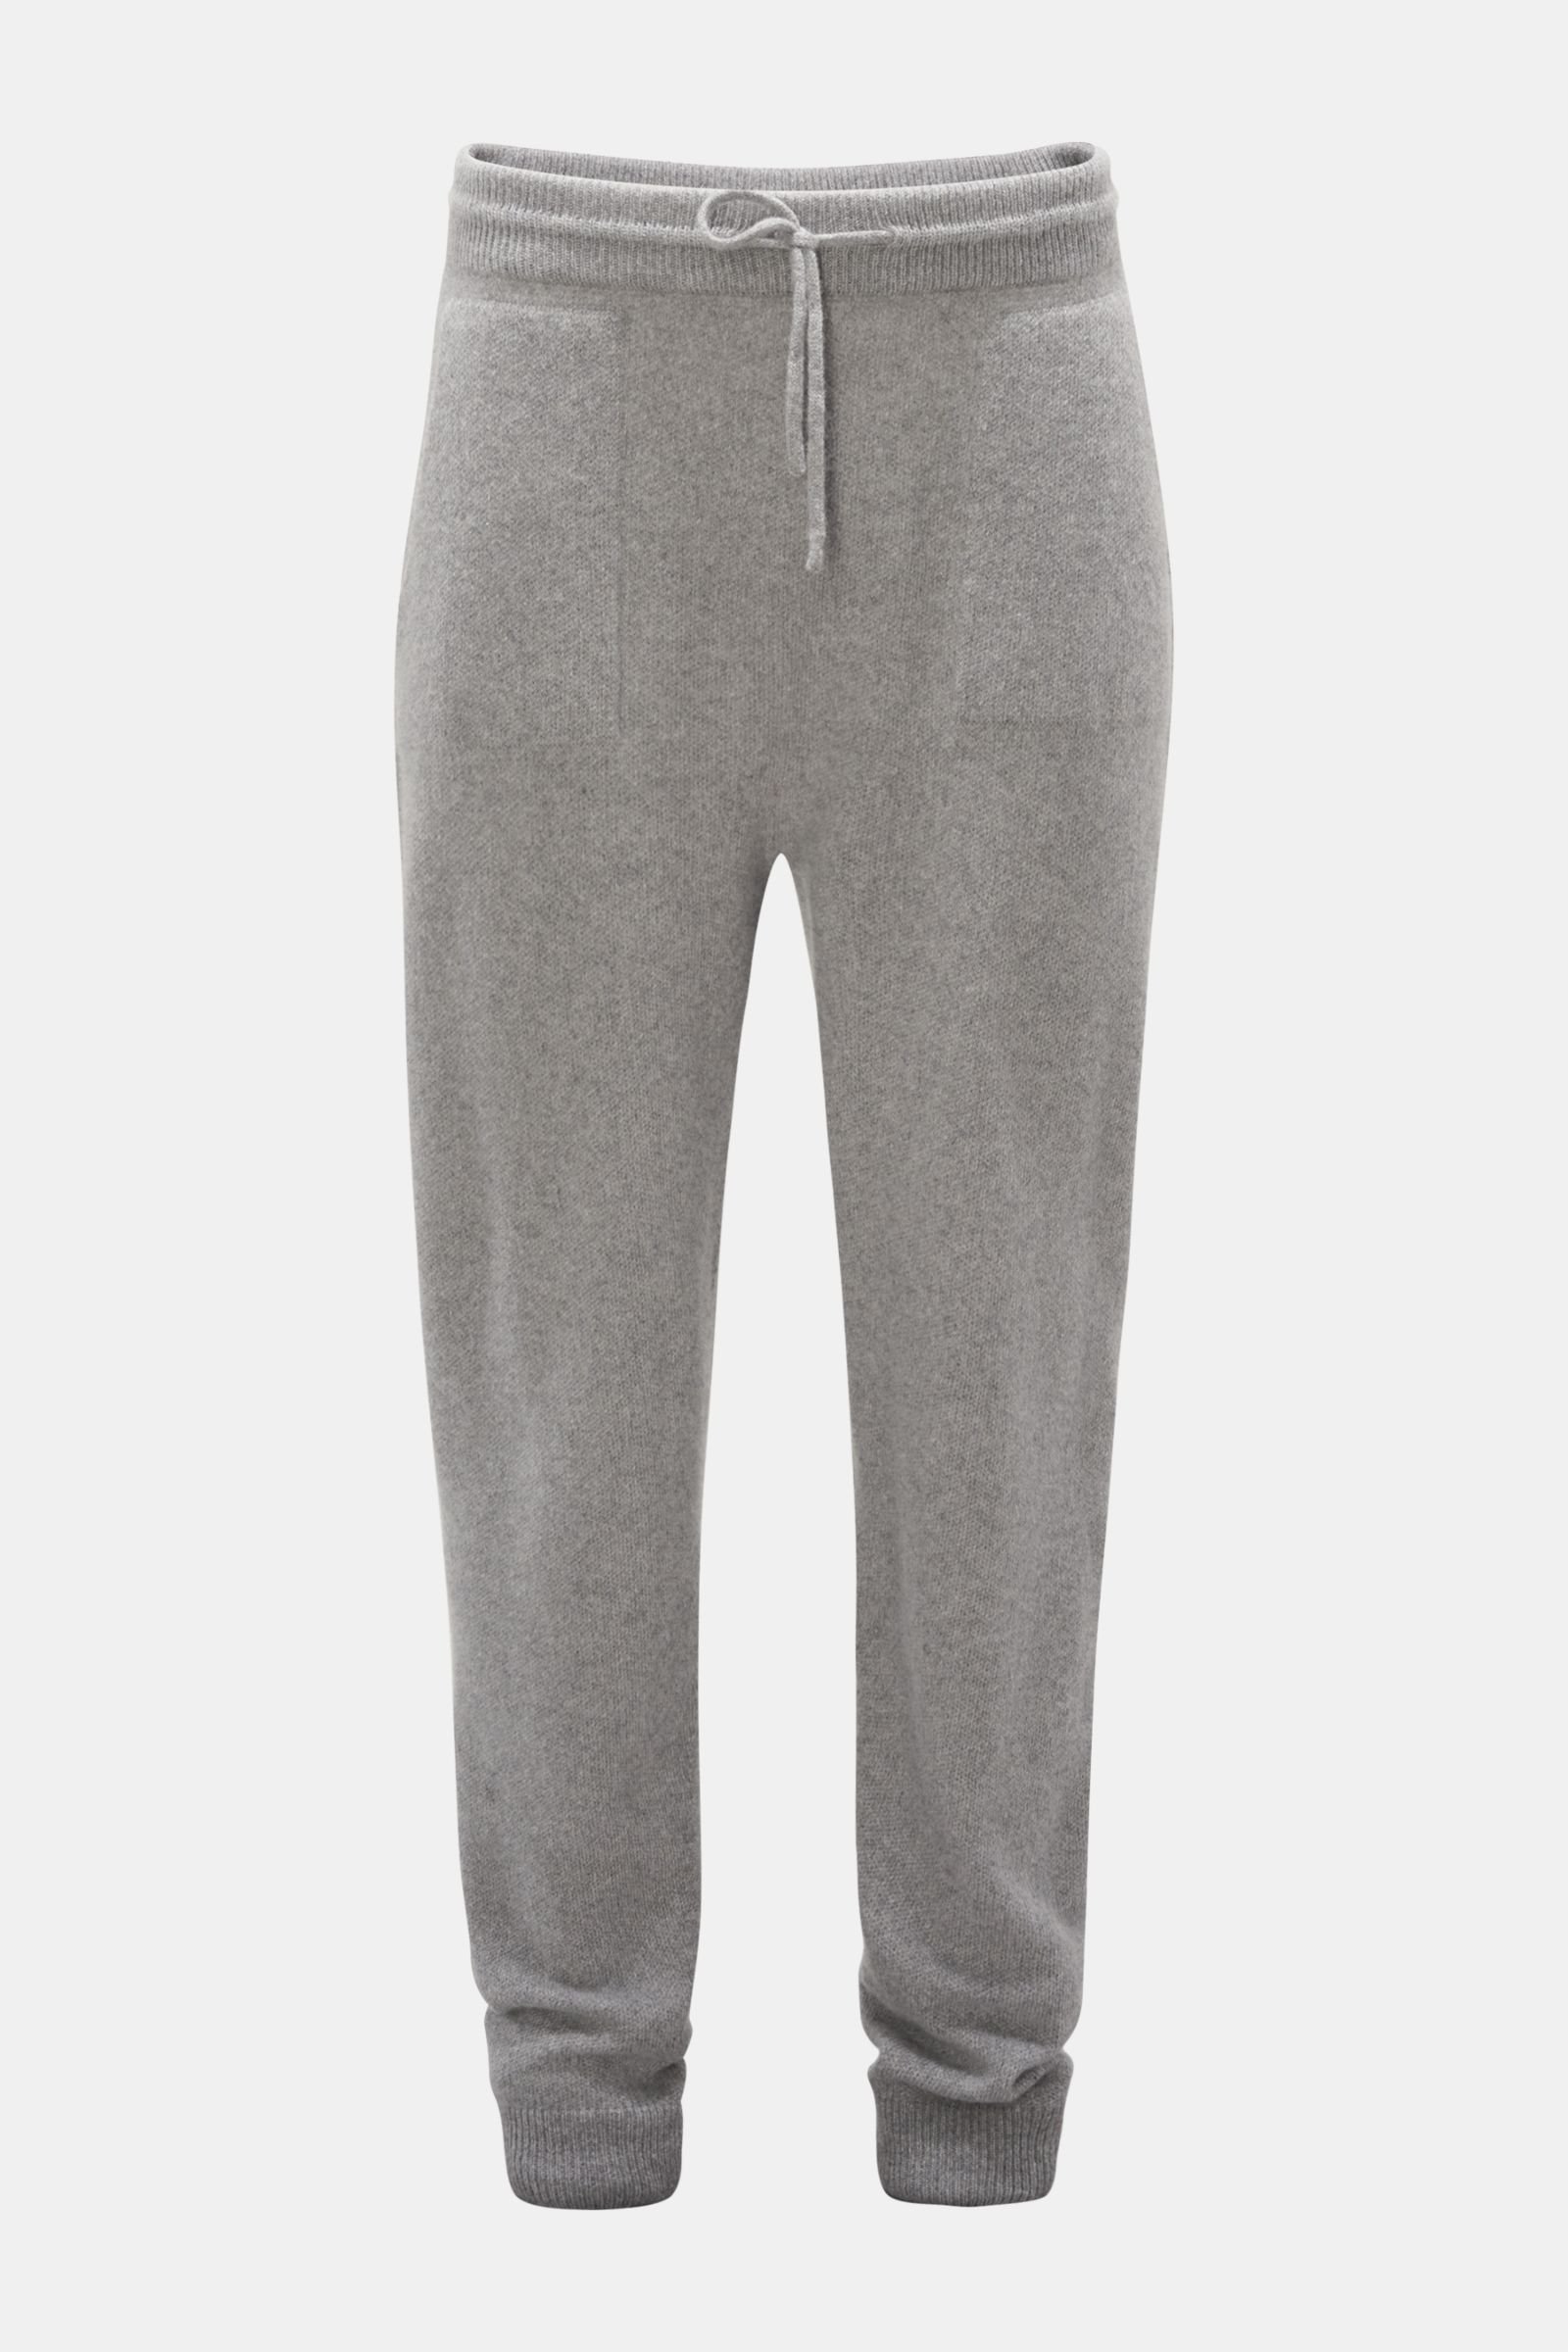 04651/ A TRIP IN A BAG cashmere jogger pants 'The cashmere Pant' grey